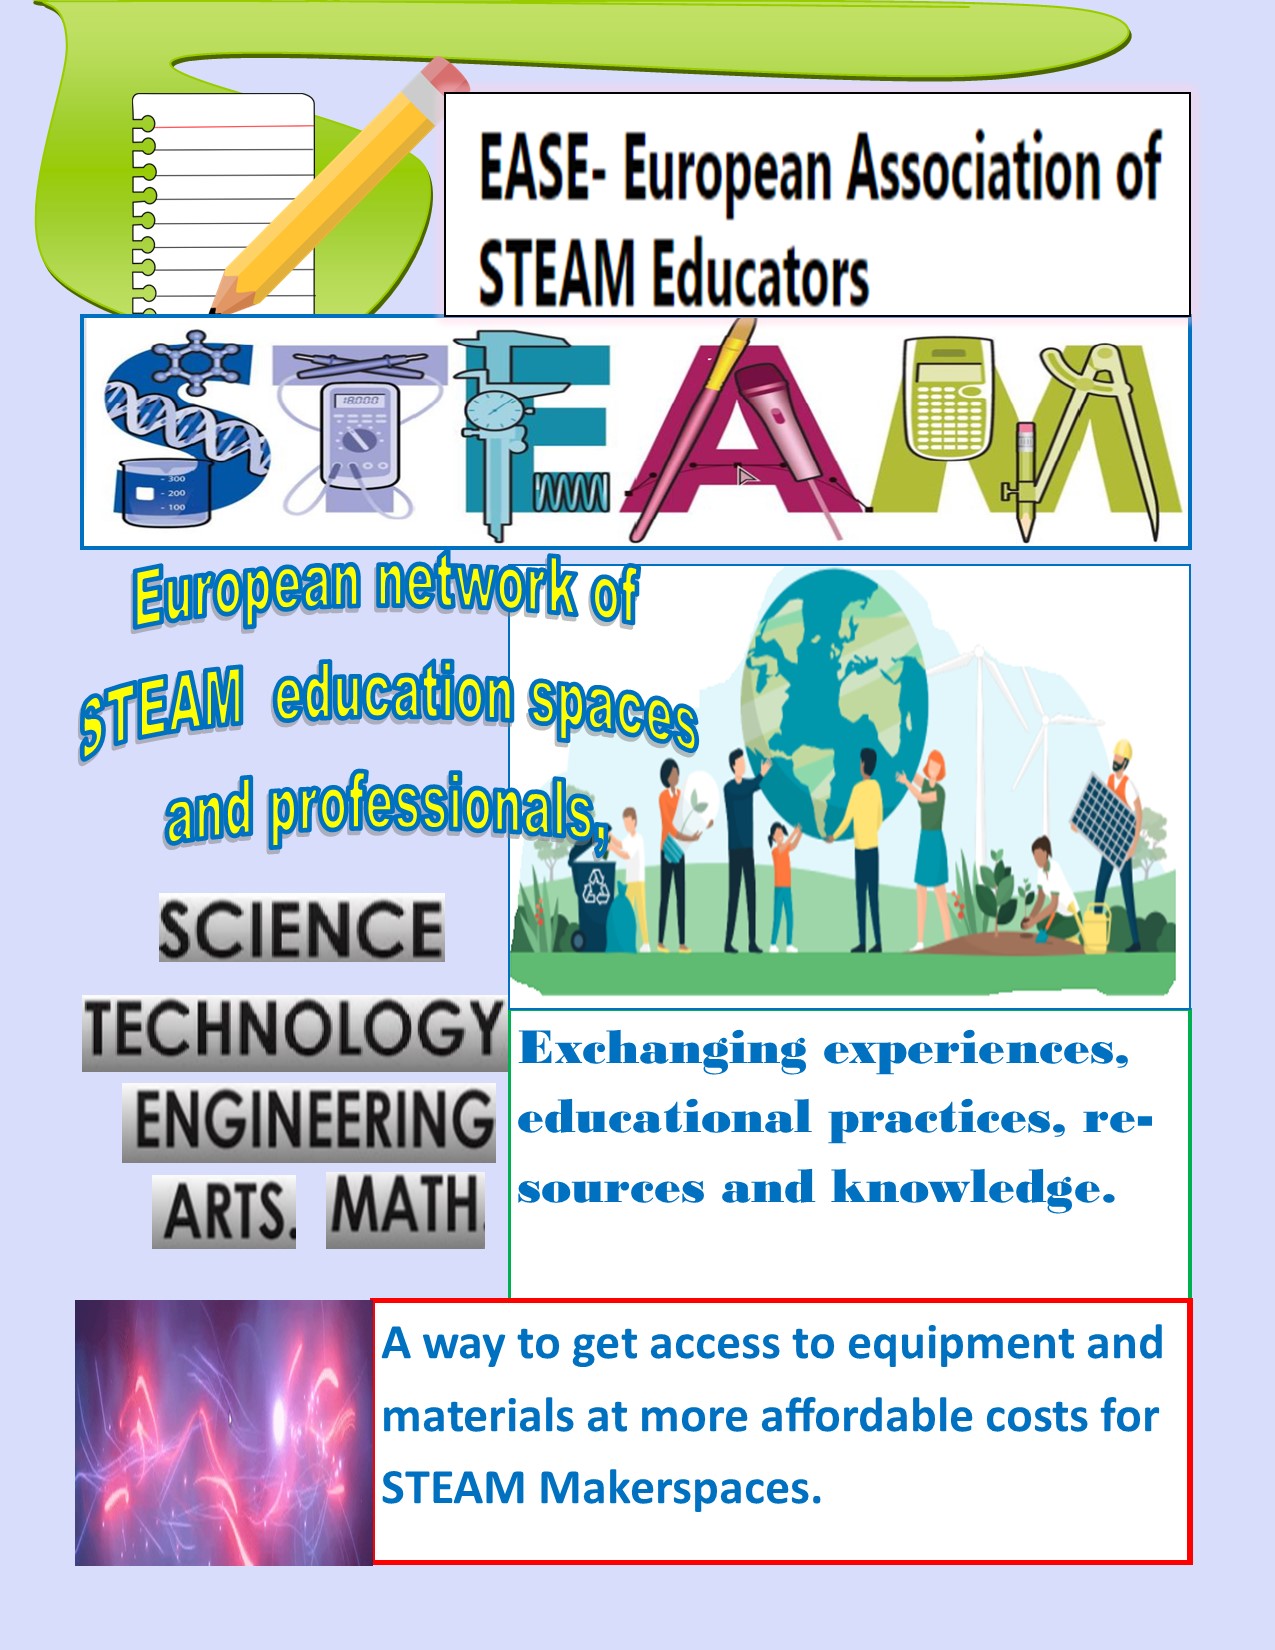 Ease European Association Of Steam Educators Ease European Association Of Steam Educators Is A Non Profit Association Whose Activity Has The Ultimate Objective Of Helping And Enhancing The Work Of All Educators